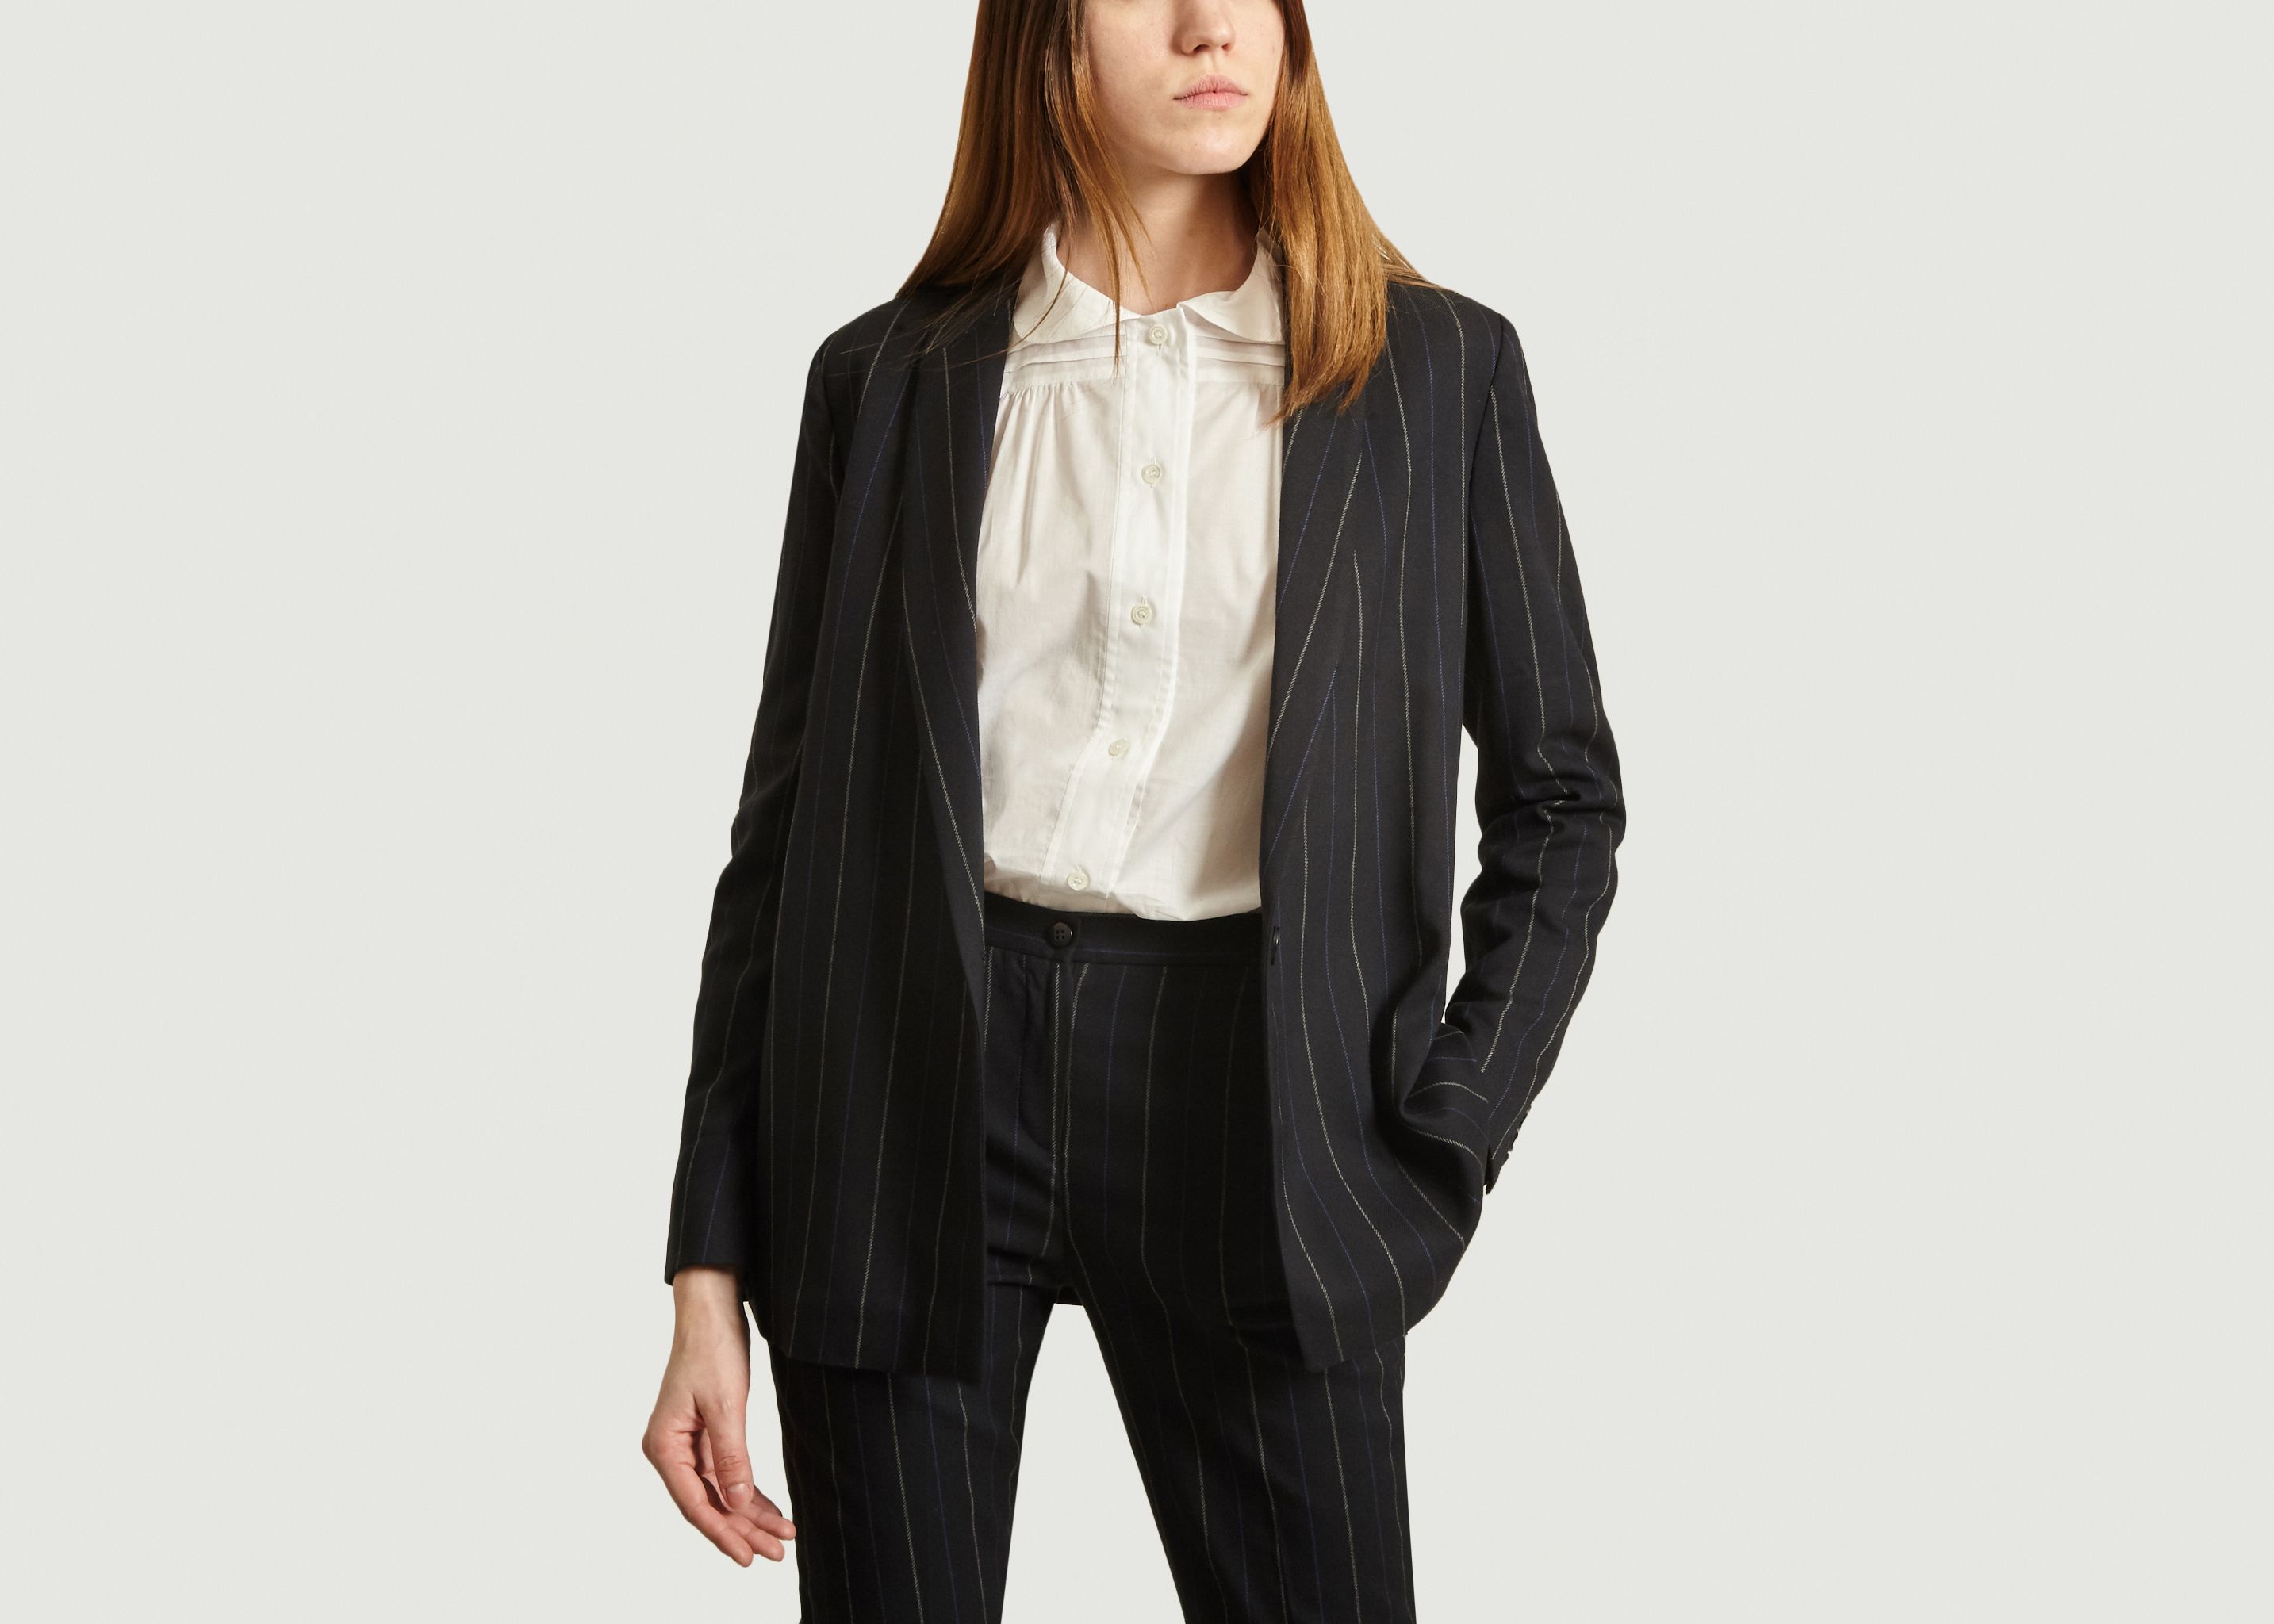 Camille tailored jacket with tennis stripes - Admise Paris